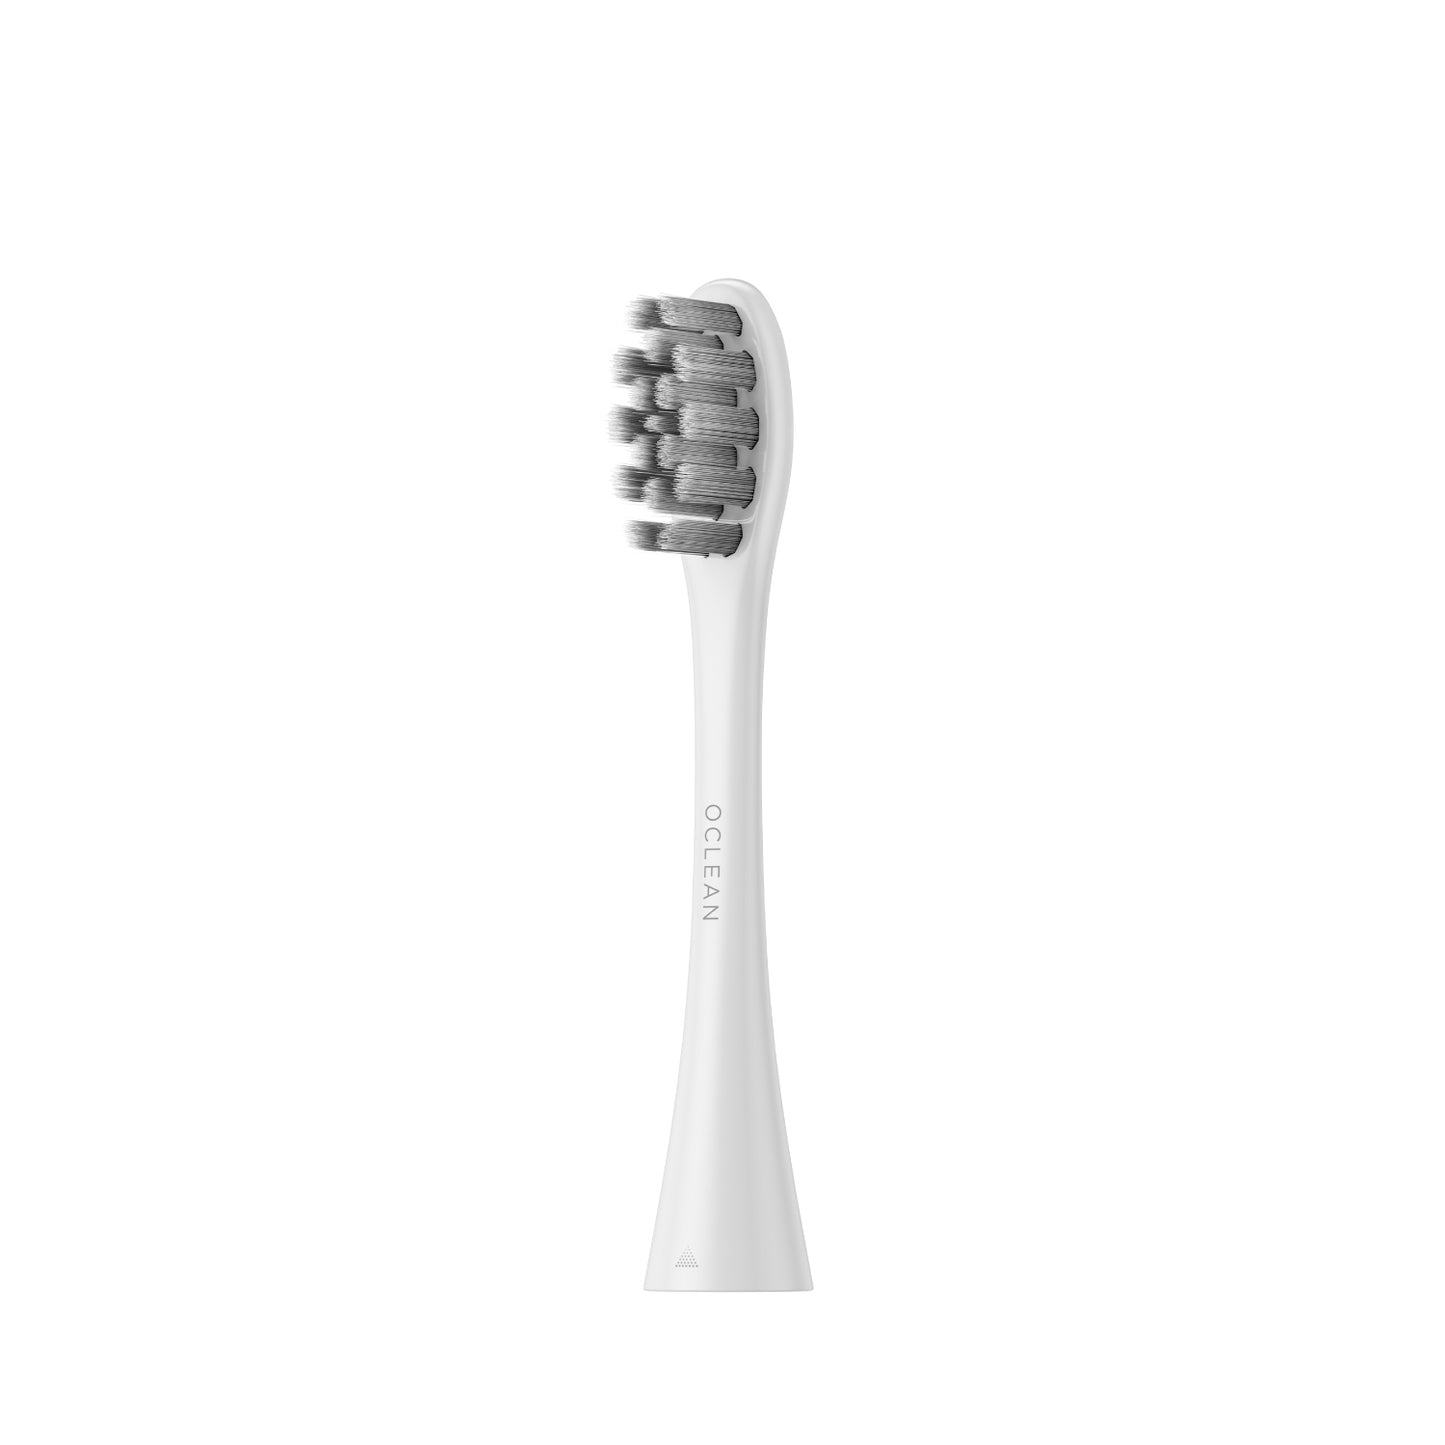 Oclean Brush Heads Refills Toothbrush Replacement Heads Gum Care P1S12 Oclean Official